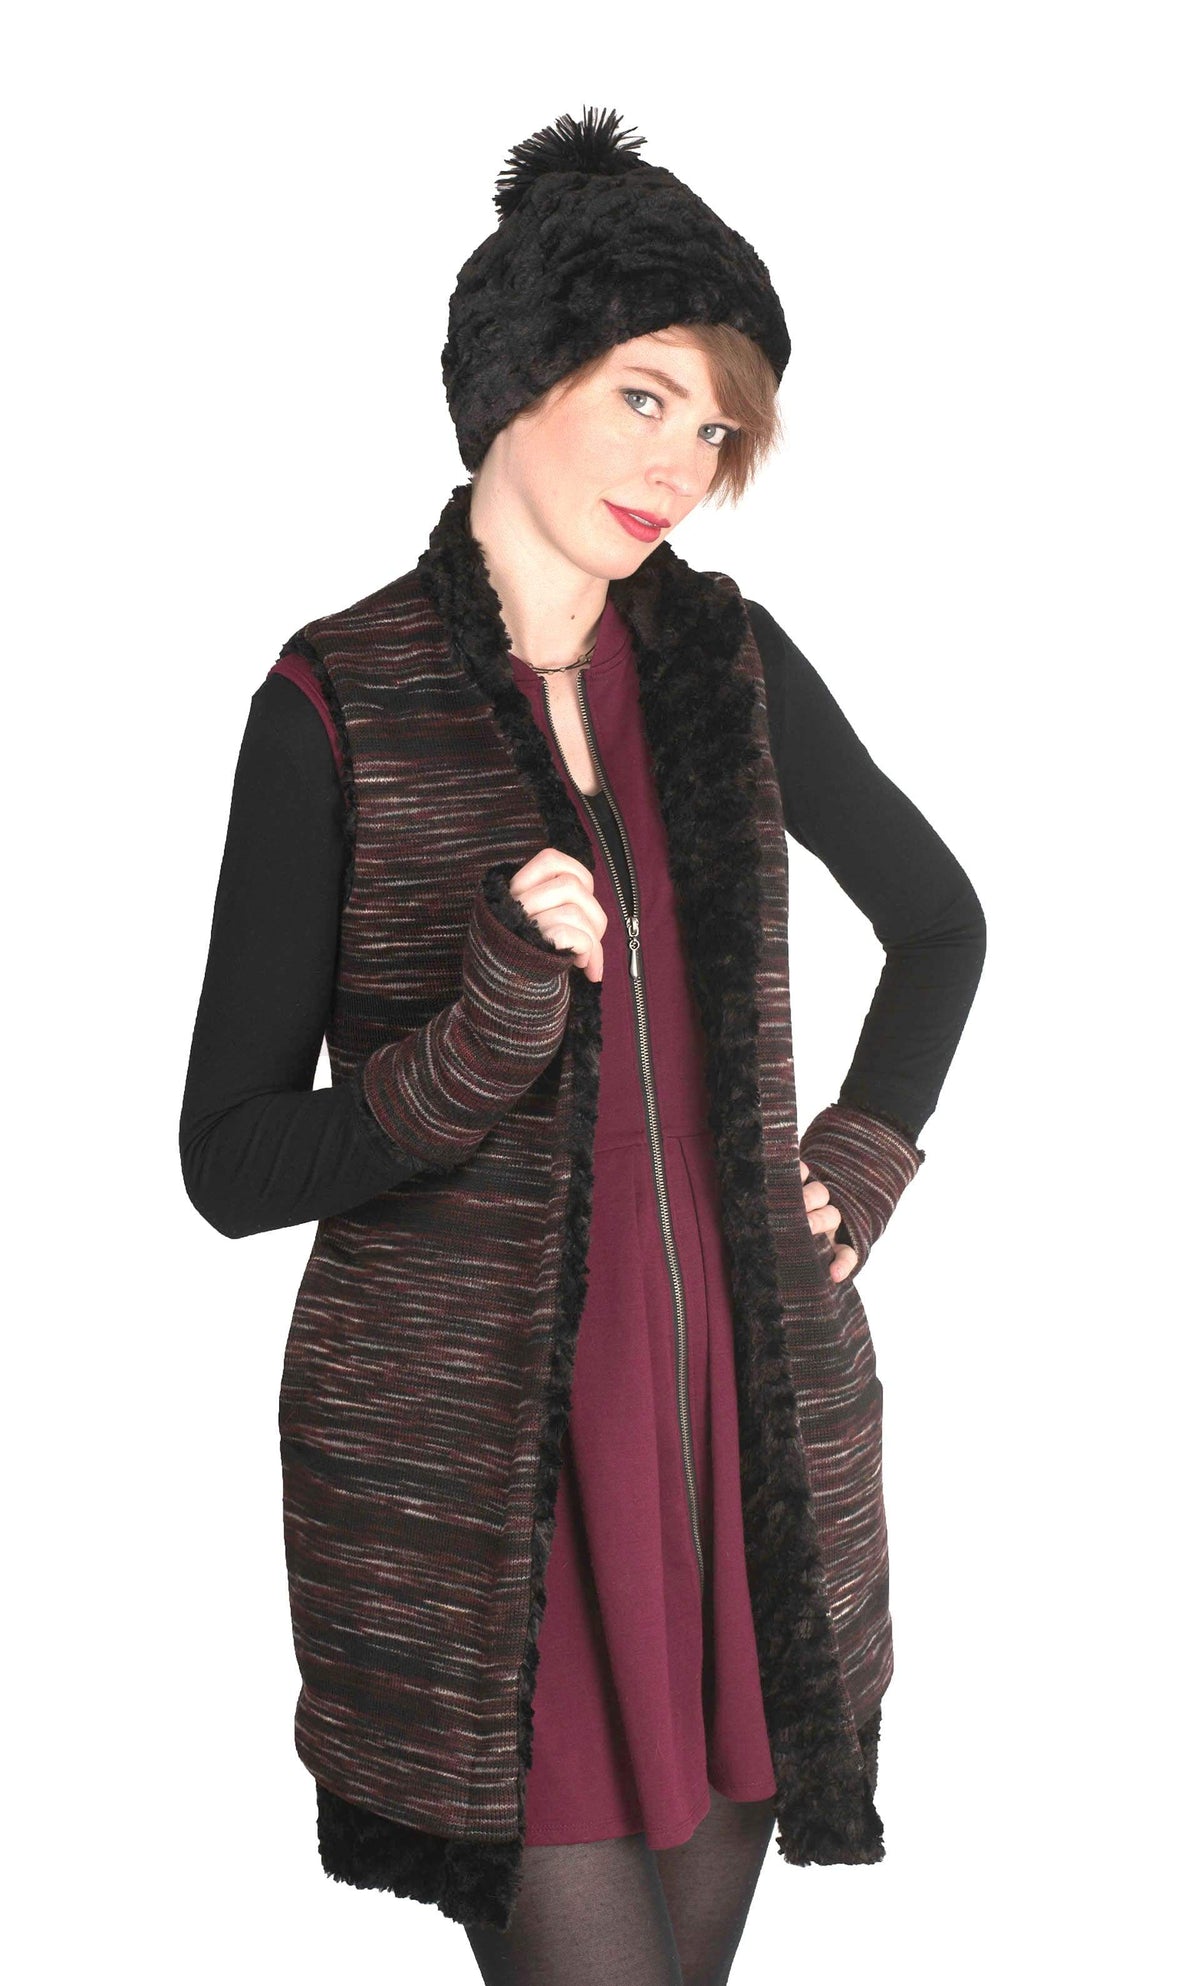 Woman posing in Mandarin Vest Long | Sweet Stripes in Cherry Cordial Knit with Cuddly Black Faux Fur | By Pandemonium Millinery | Handmade in Seattle WA USA